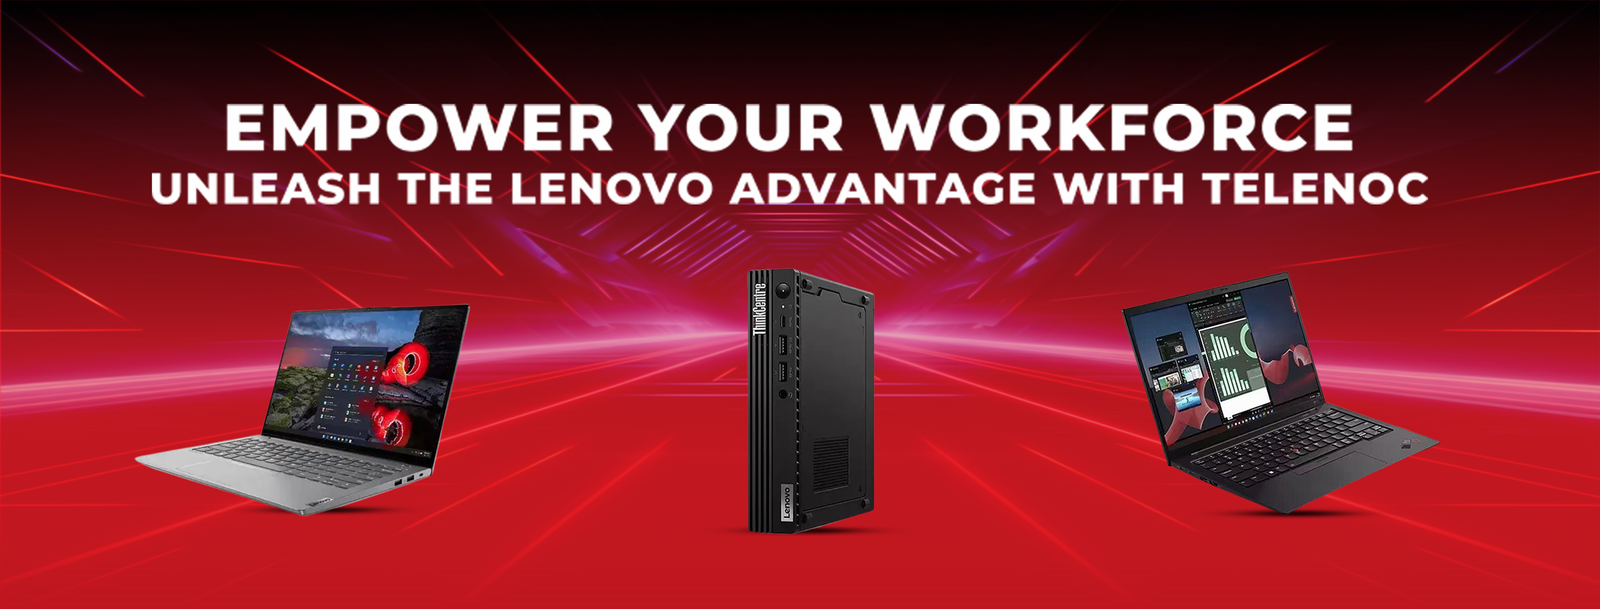 Telenoc is lenovo partner in saudi arabia providing lenovo thinkpad laptops, gaming, yoga laptops. We are also offer server and storage products.